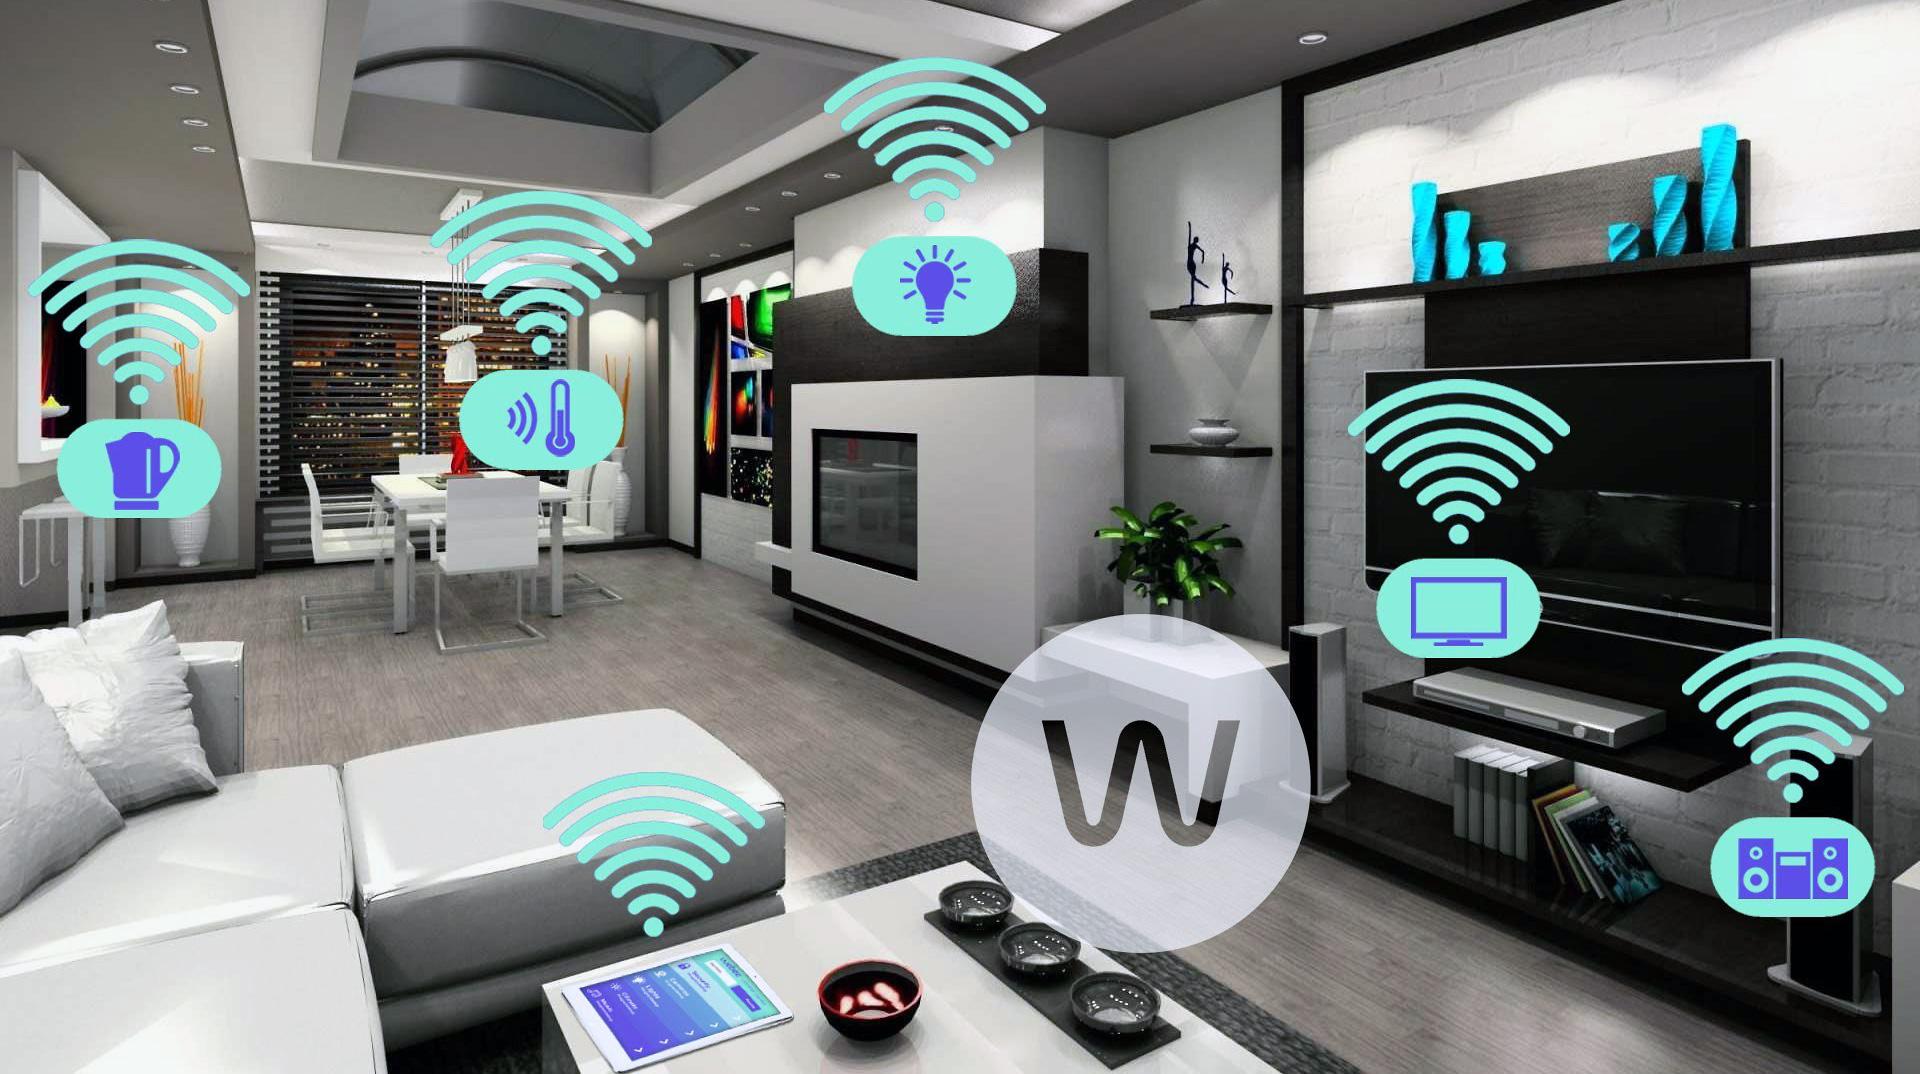 We Need to Develop IoT standards and Protocols to Protect Smart Homes